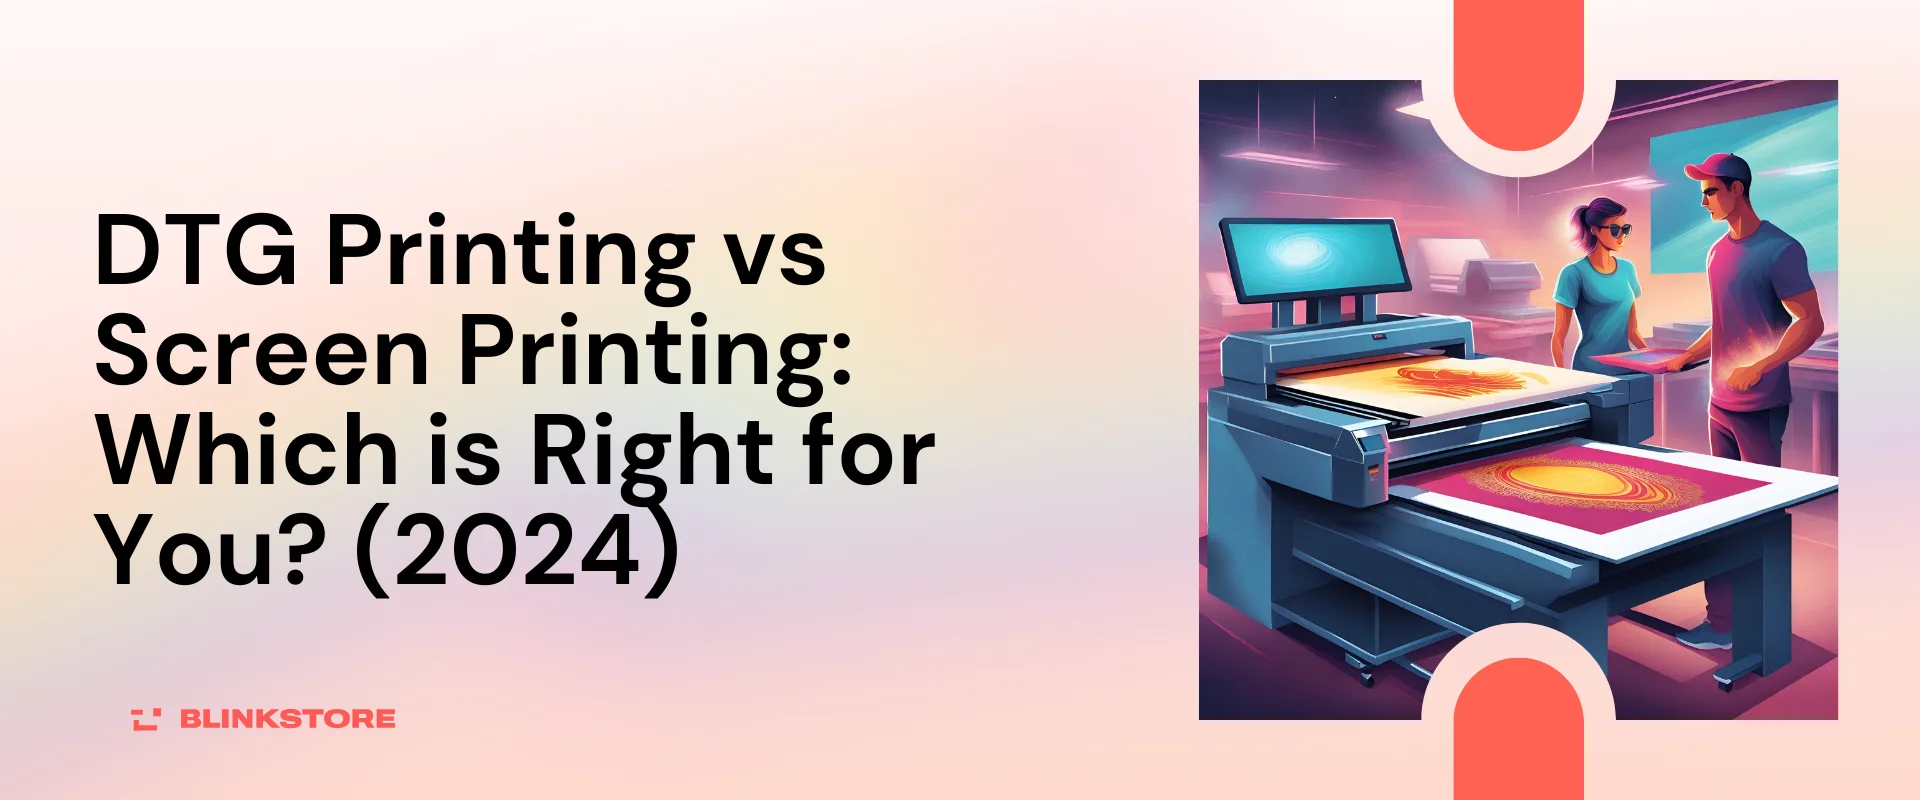 DTG Printing vs Screen Printing: Which is Right for You? (2024)